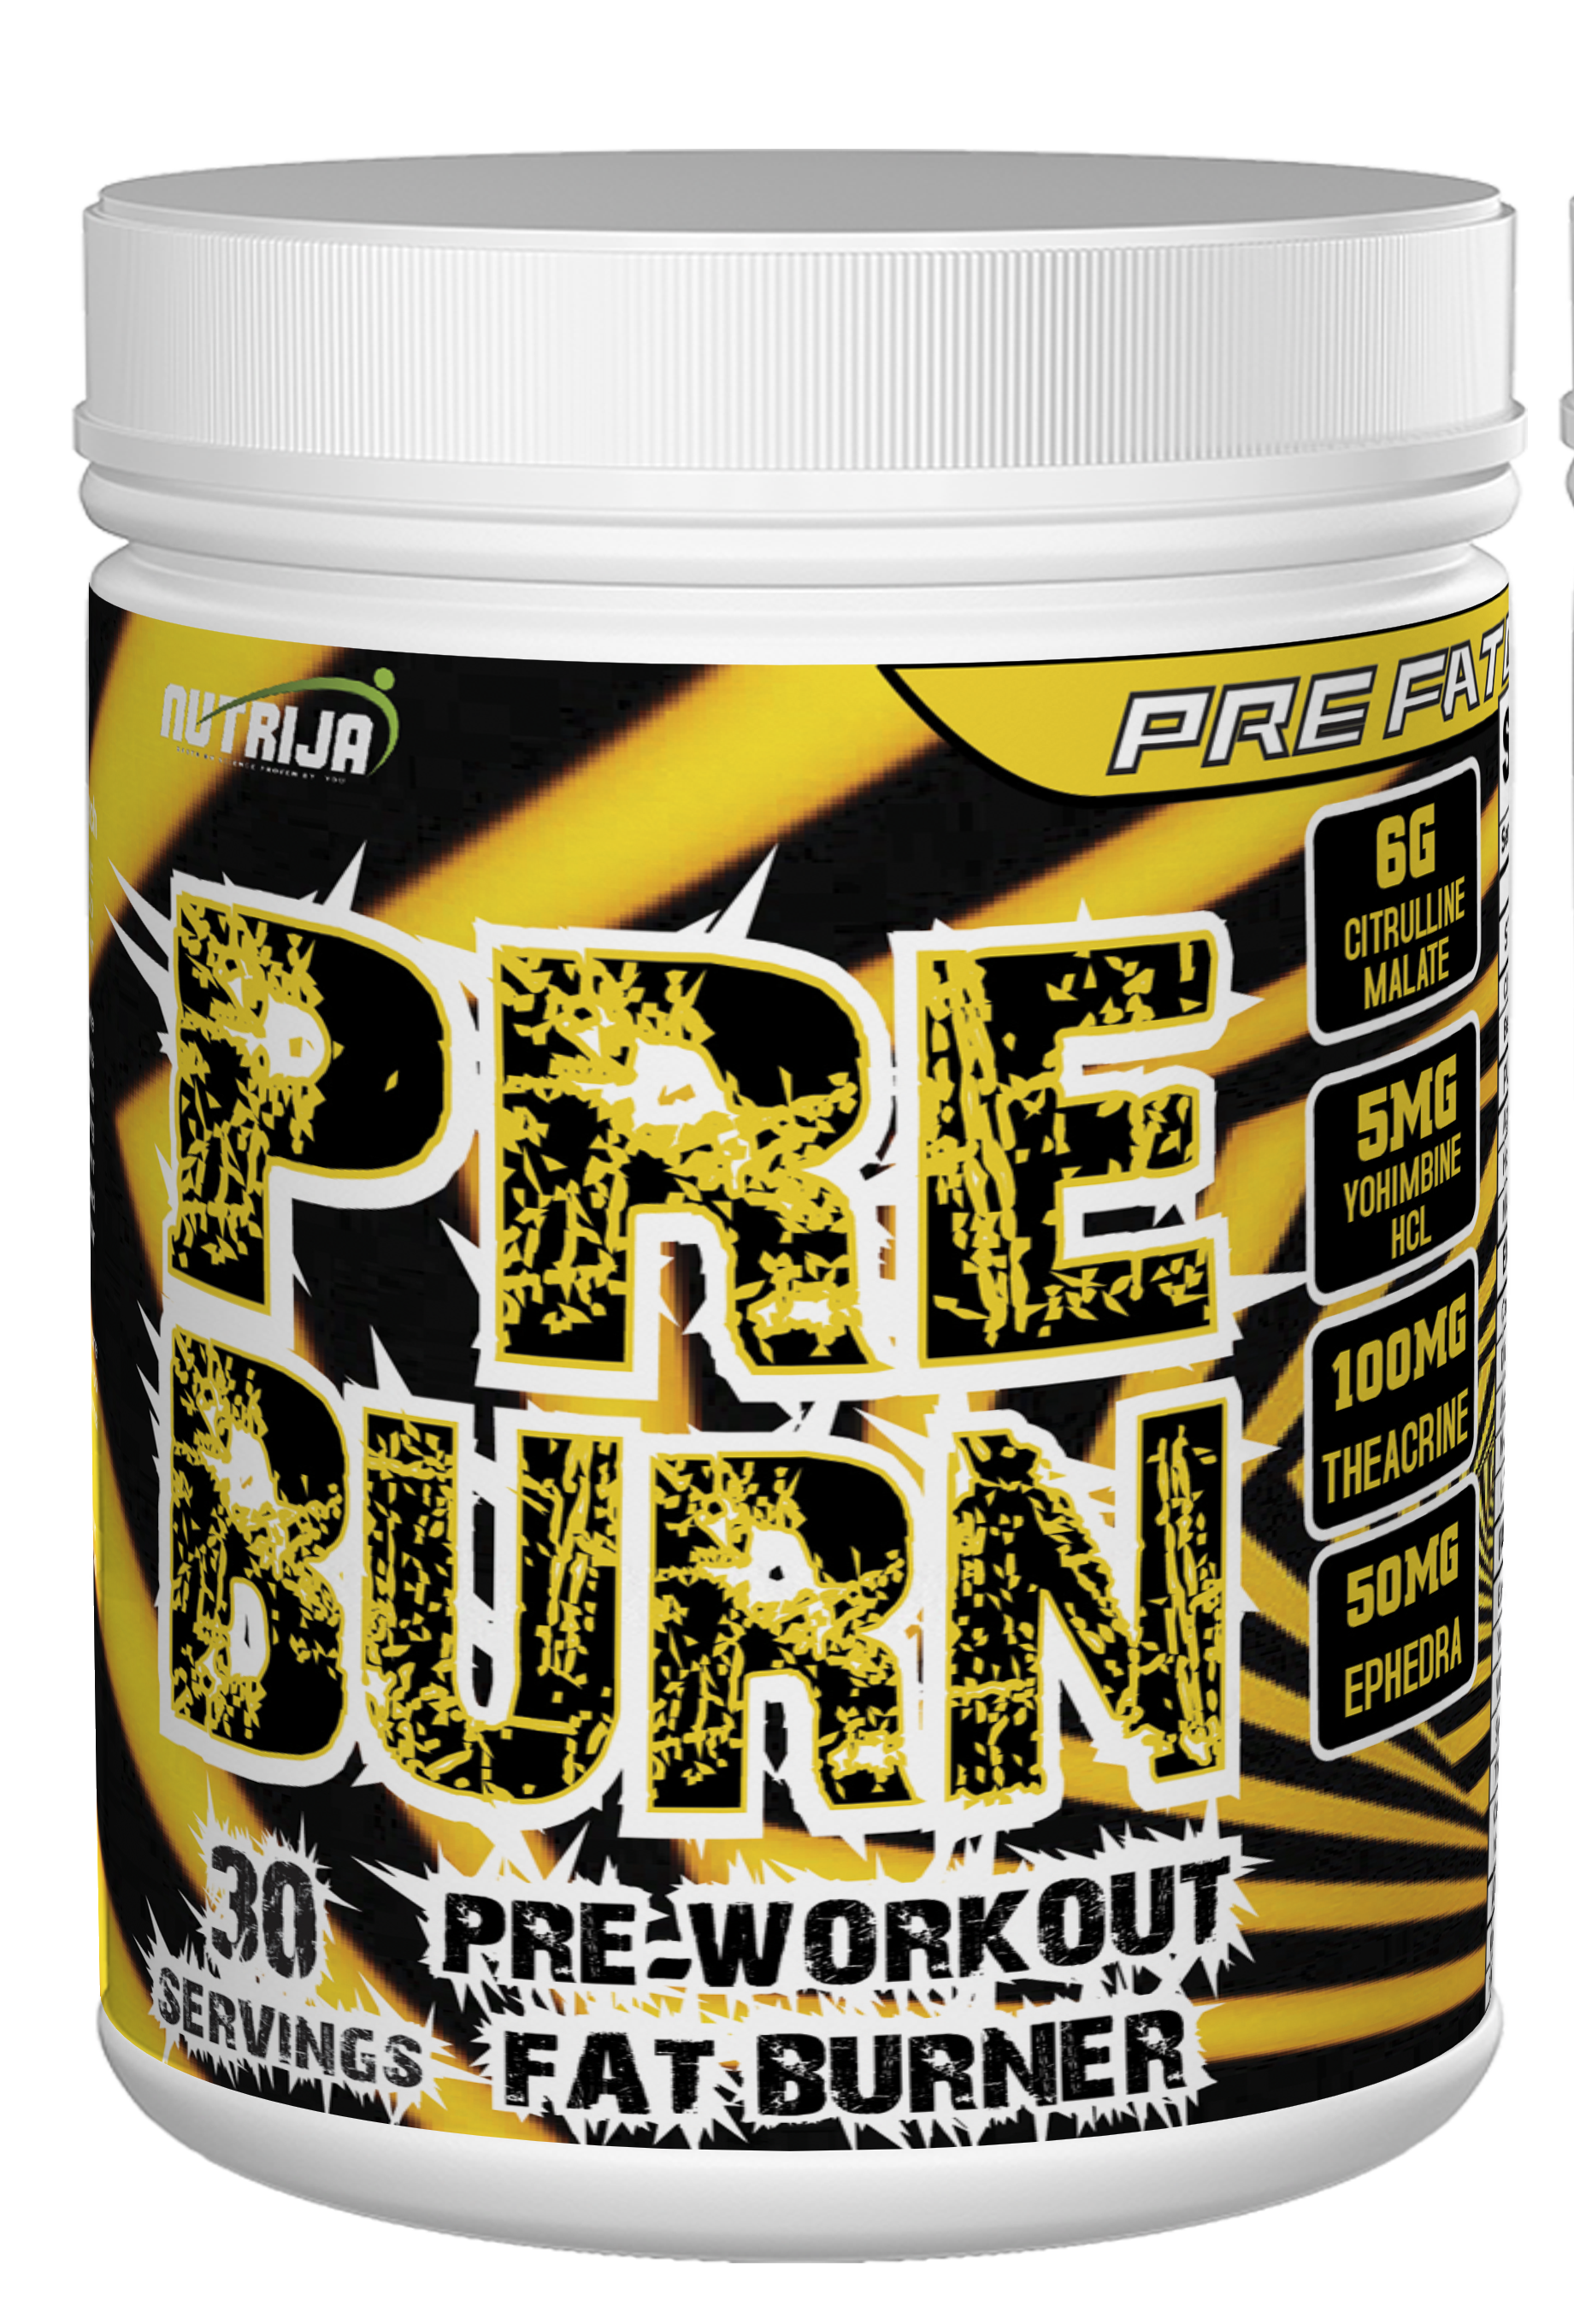 21 30 Minute Pre workout plus fat burner for Six Pack